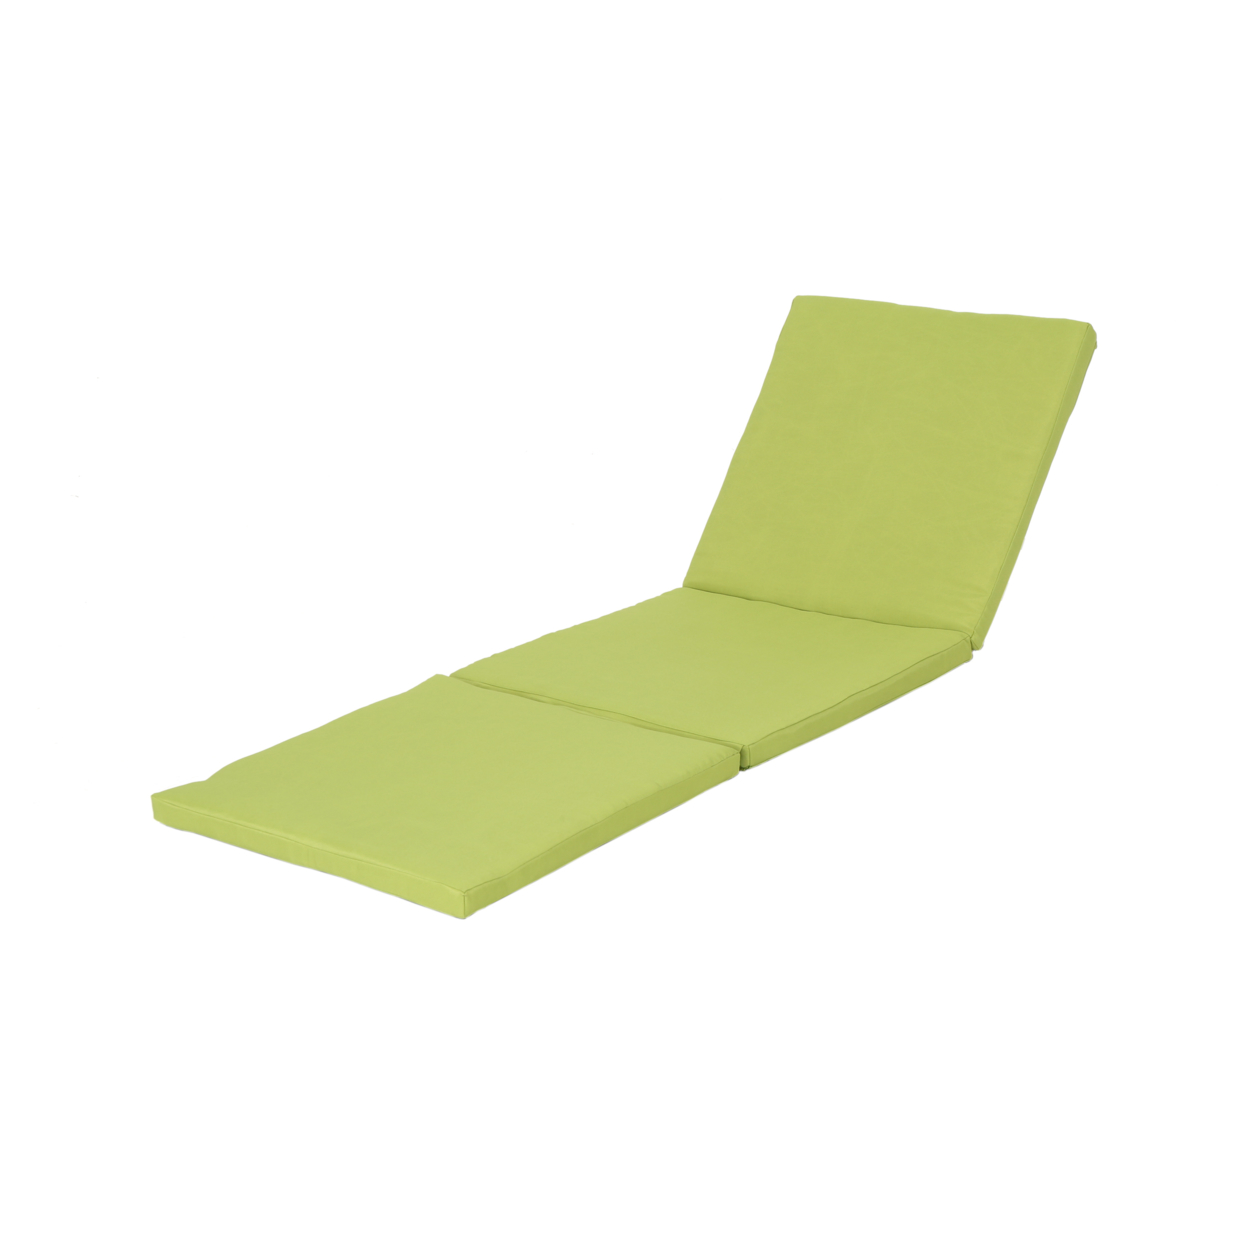 Laraine Outdoor Water Resistant Chaise Lounge Cushion - Green